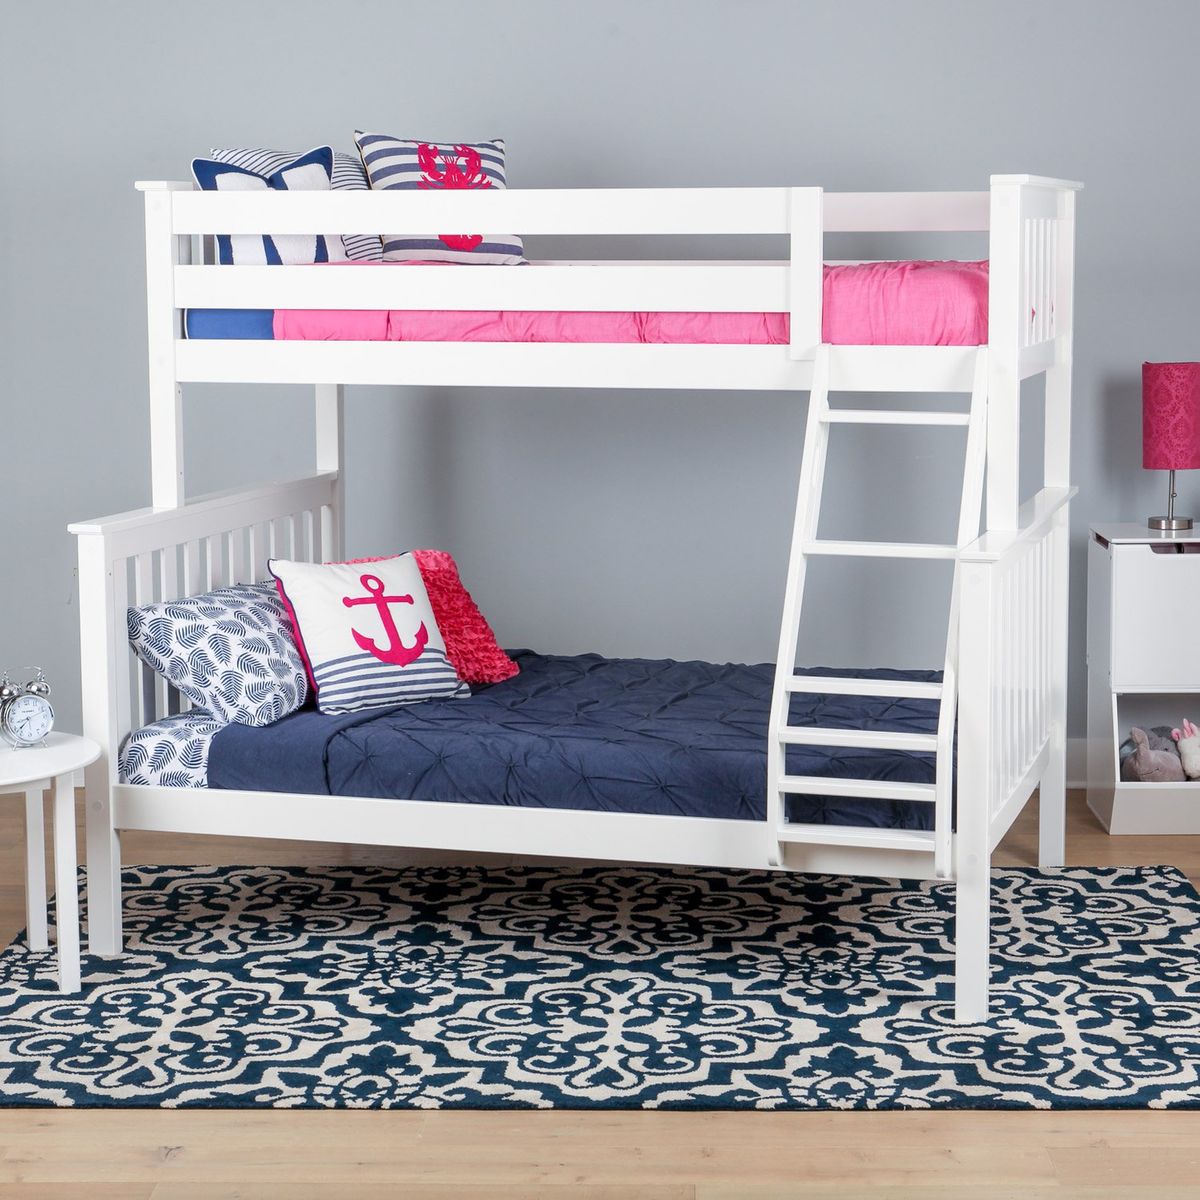 Black Panana 4 Colors Available Twins Single Bunk Bed 2pcs 3FT Metal Bed for Twins Adults Bedroom 